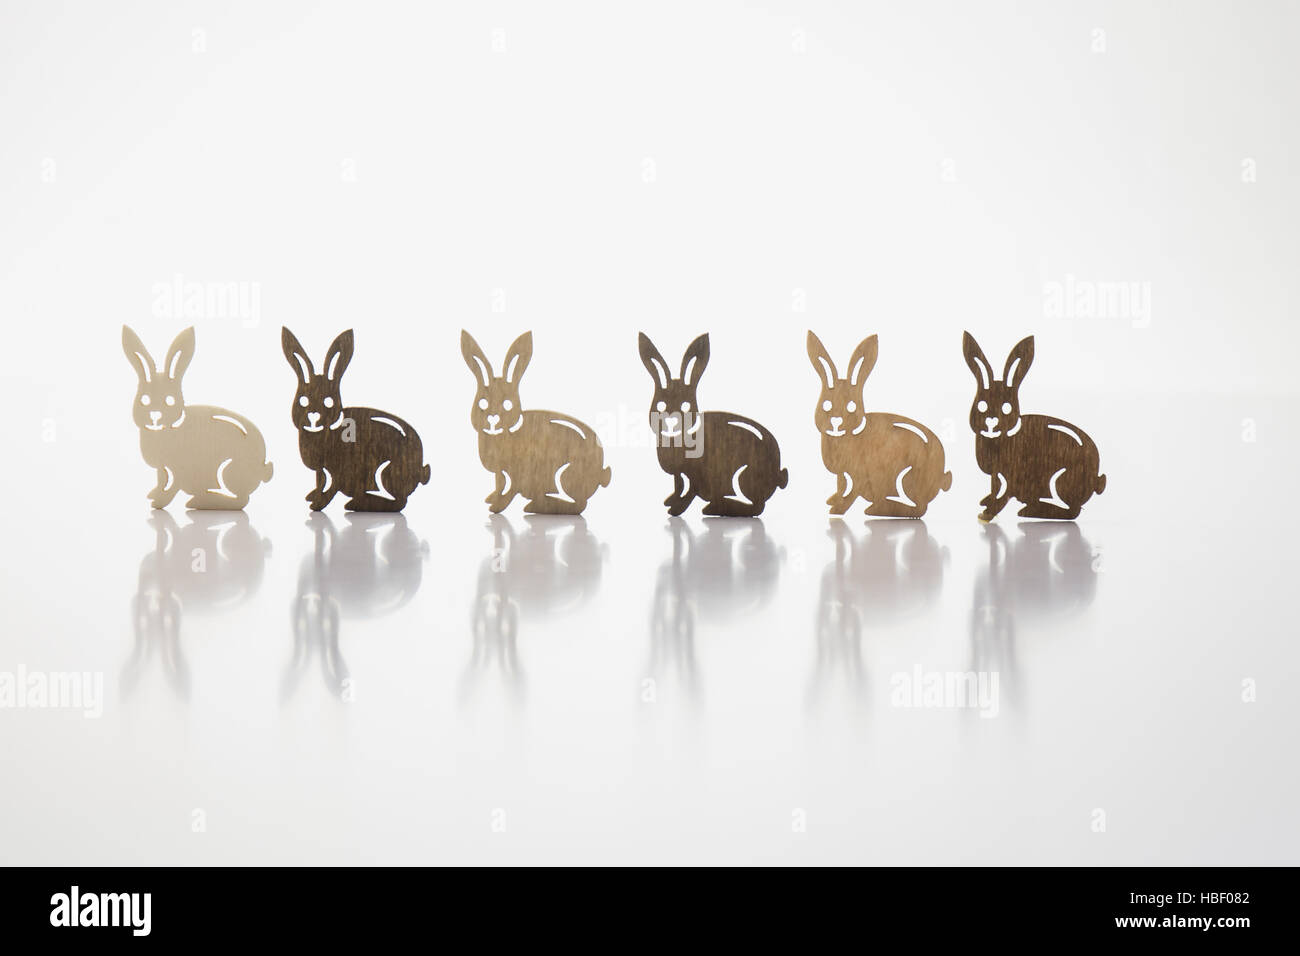 Rabbits in differferent browns Stock Photo